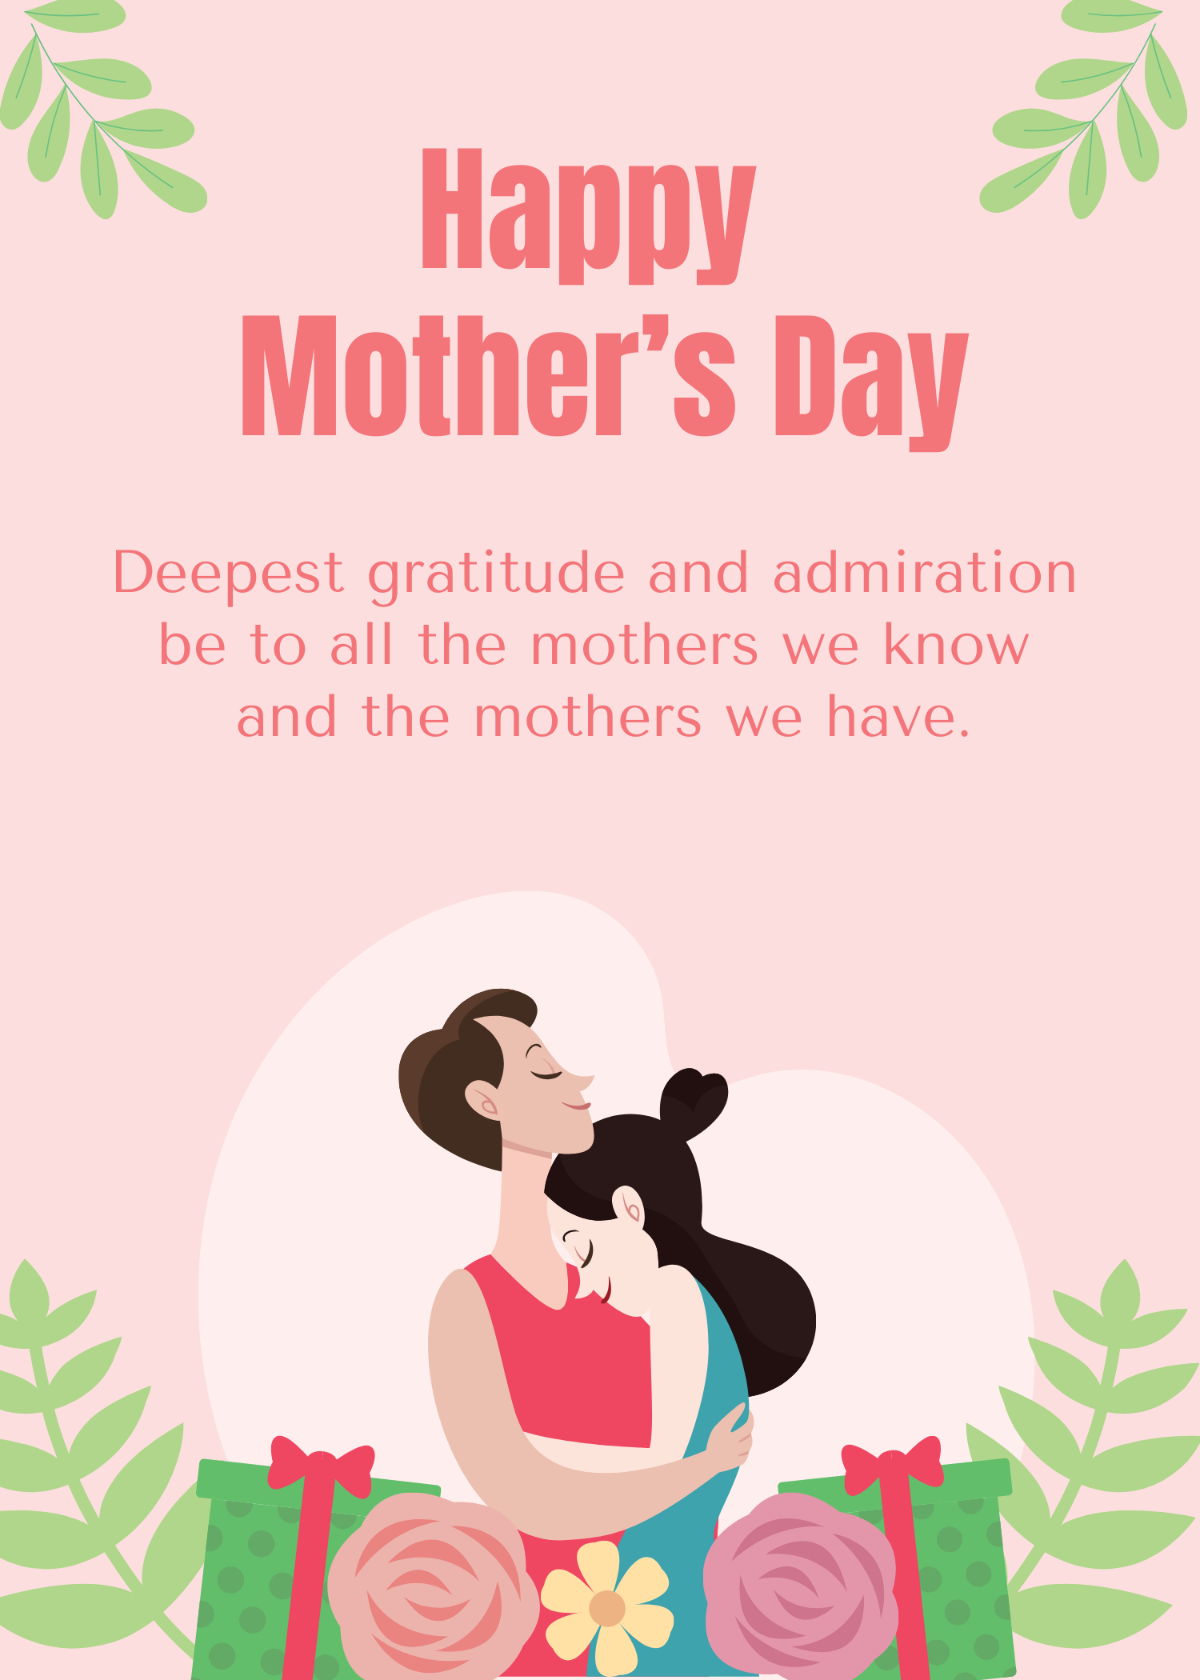 Mother's Day Greeting Card Template